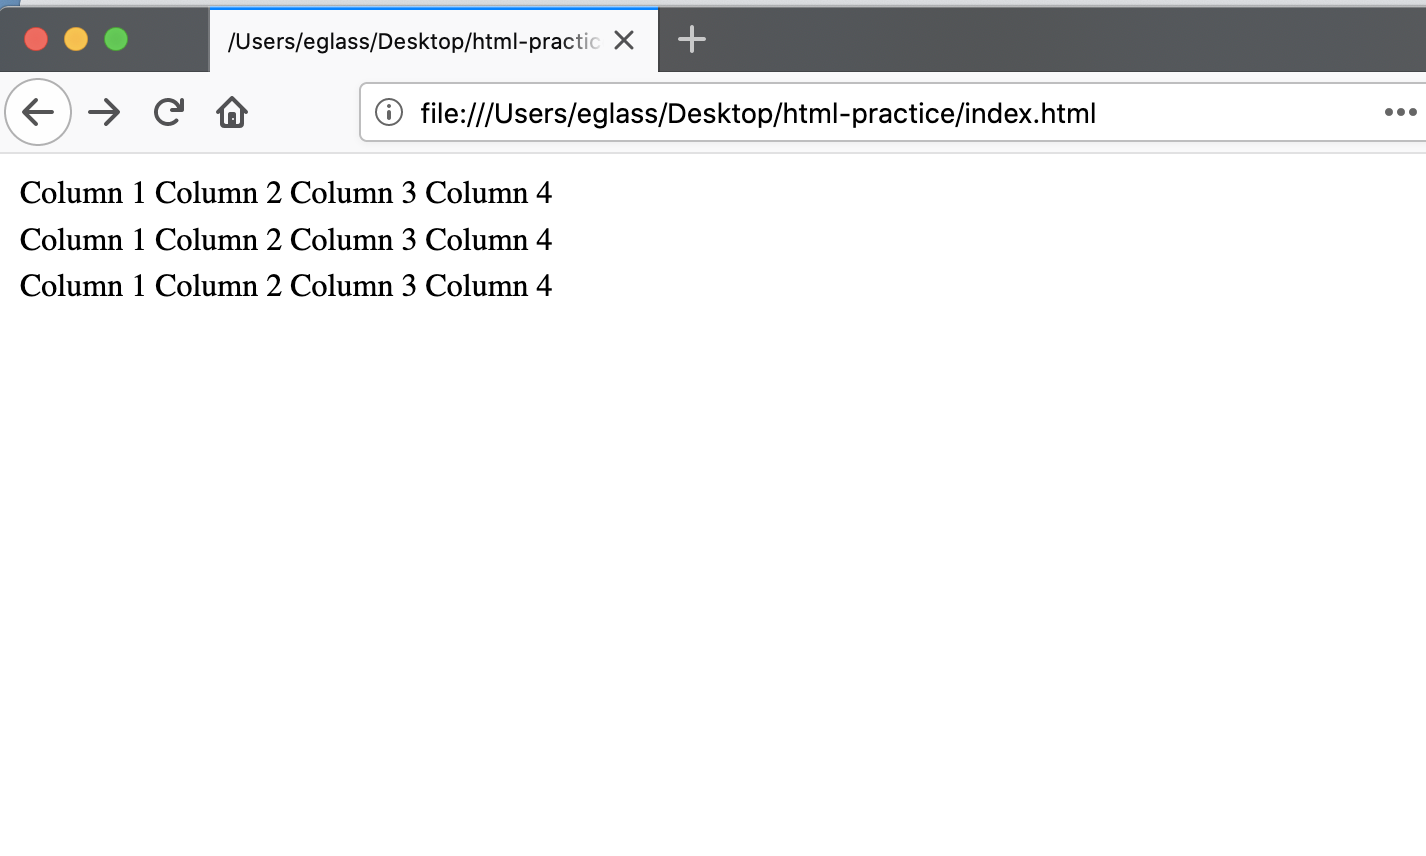 Webpage displaying table with three rows and four columns